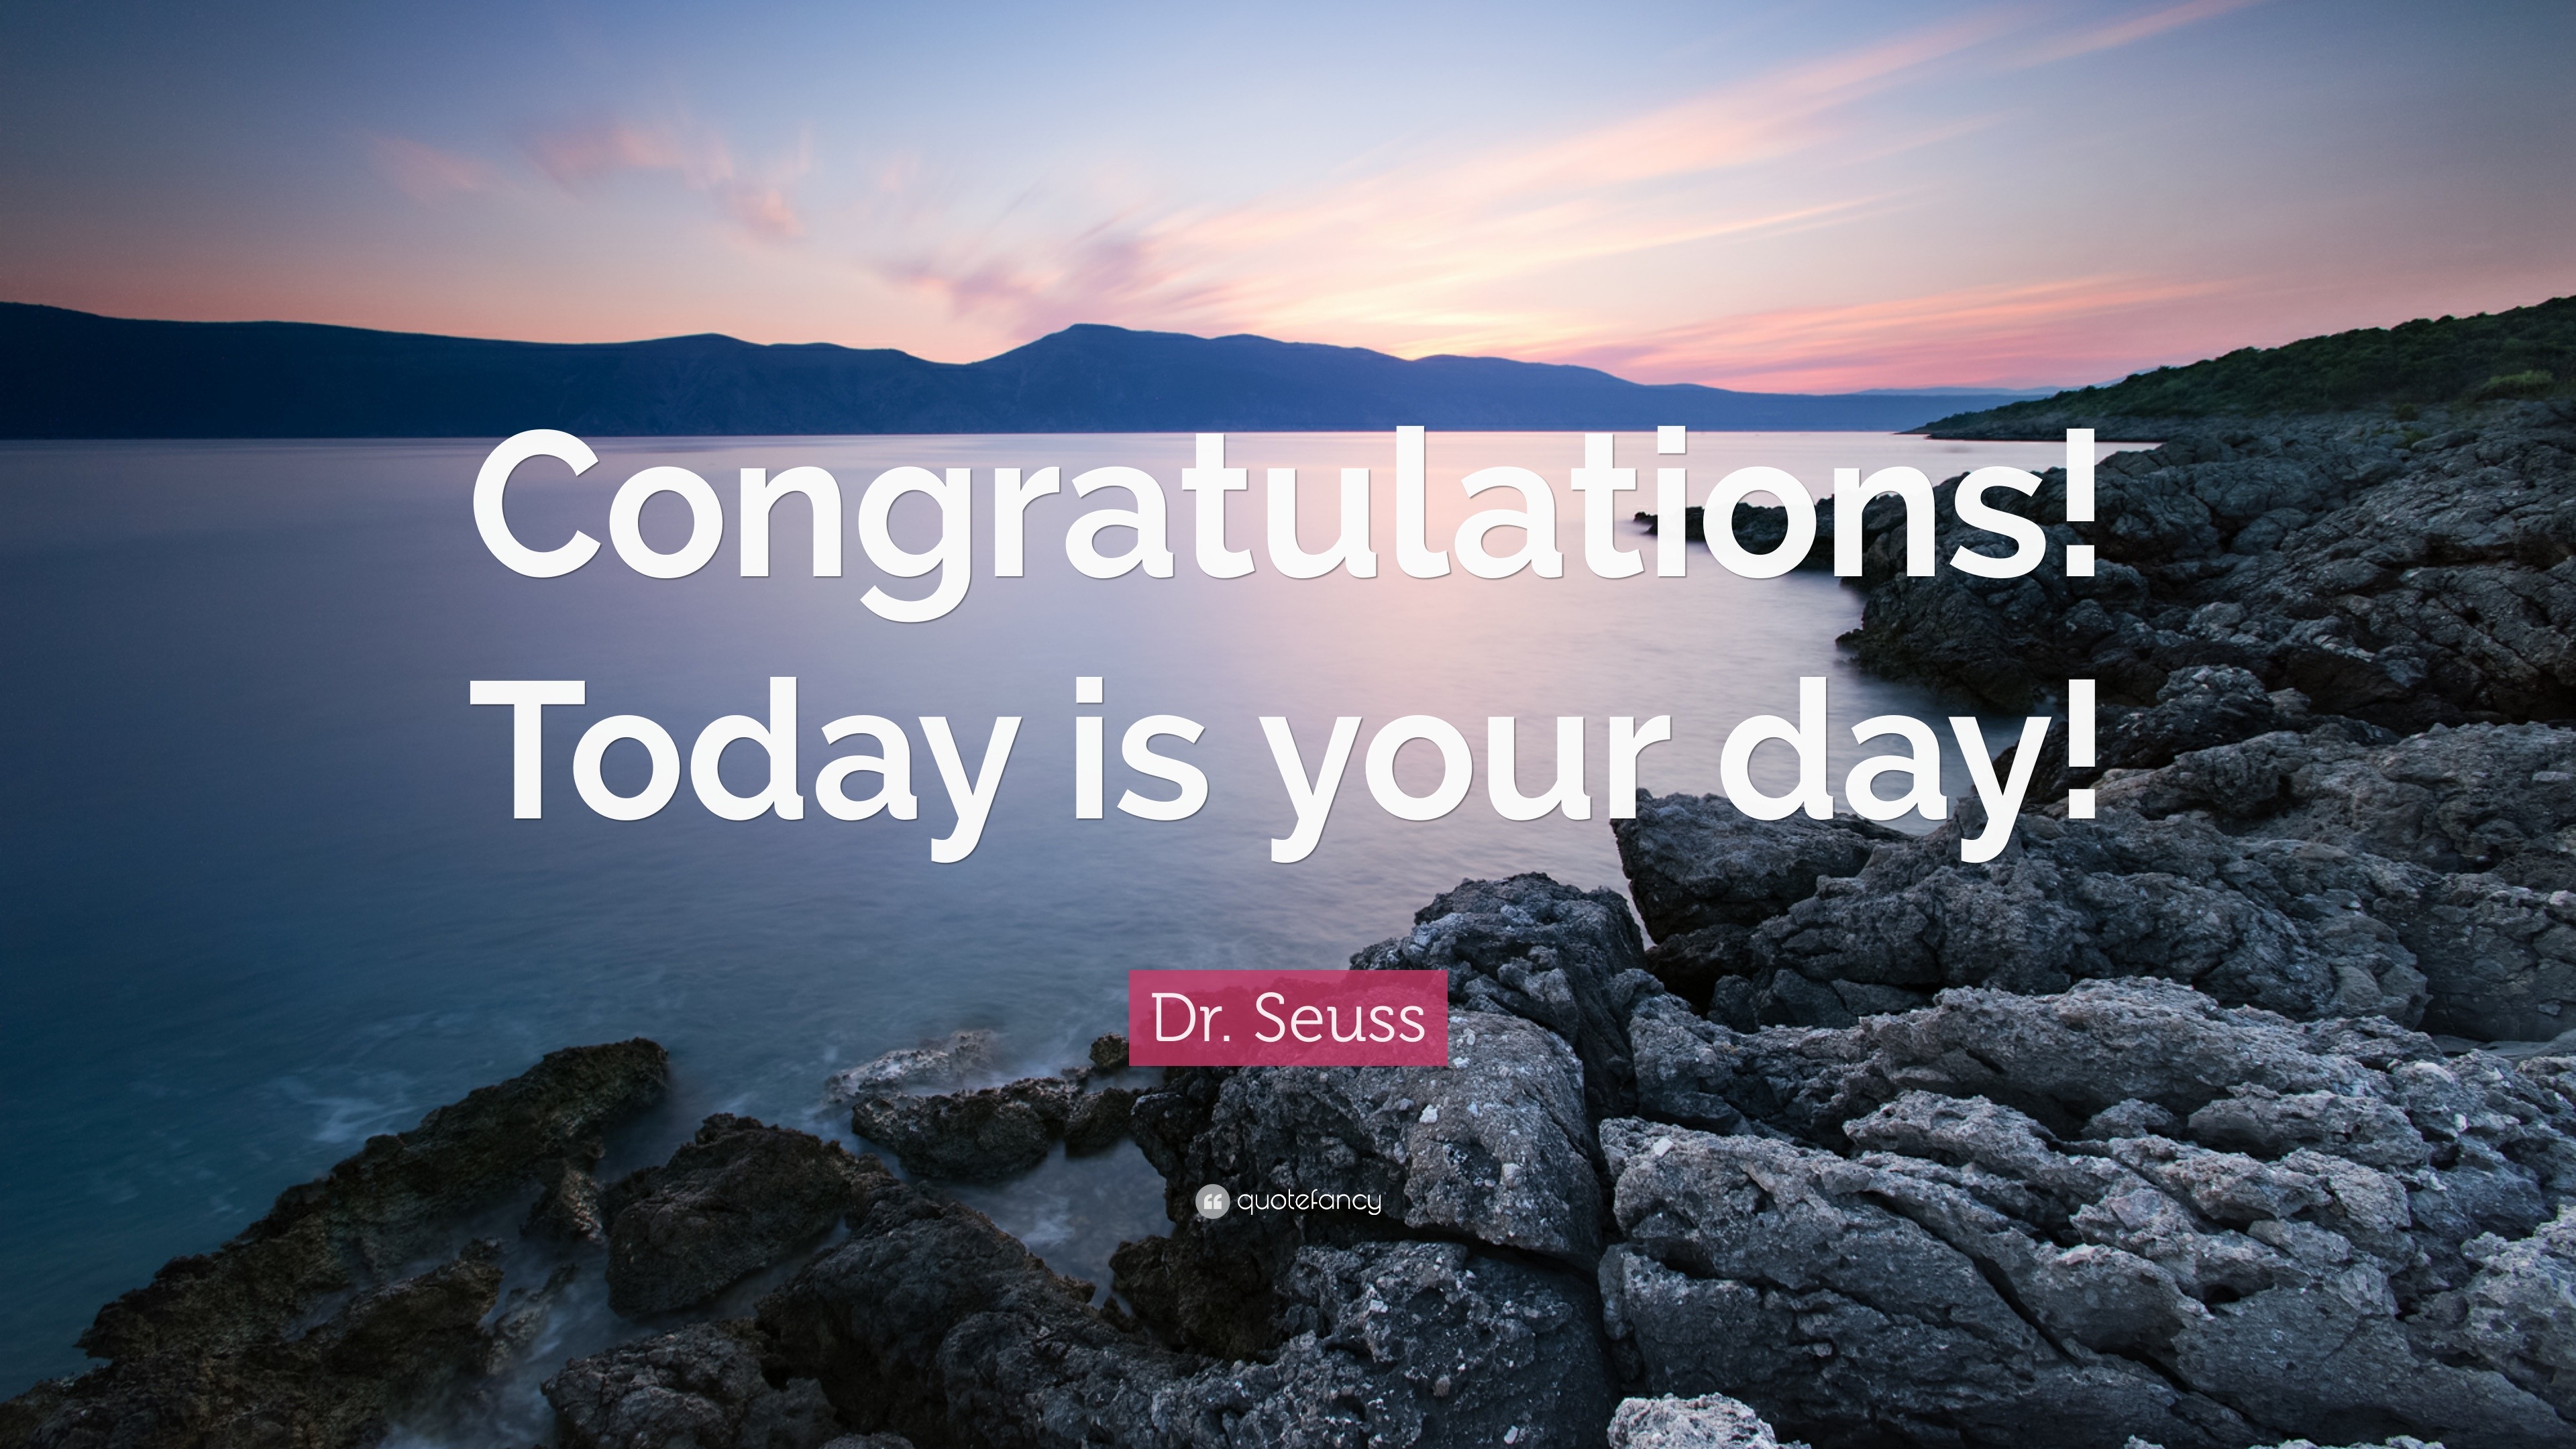 Dr. Seuss Quote: “Congratulations! Today is your day!”